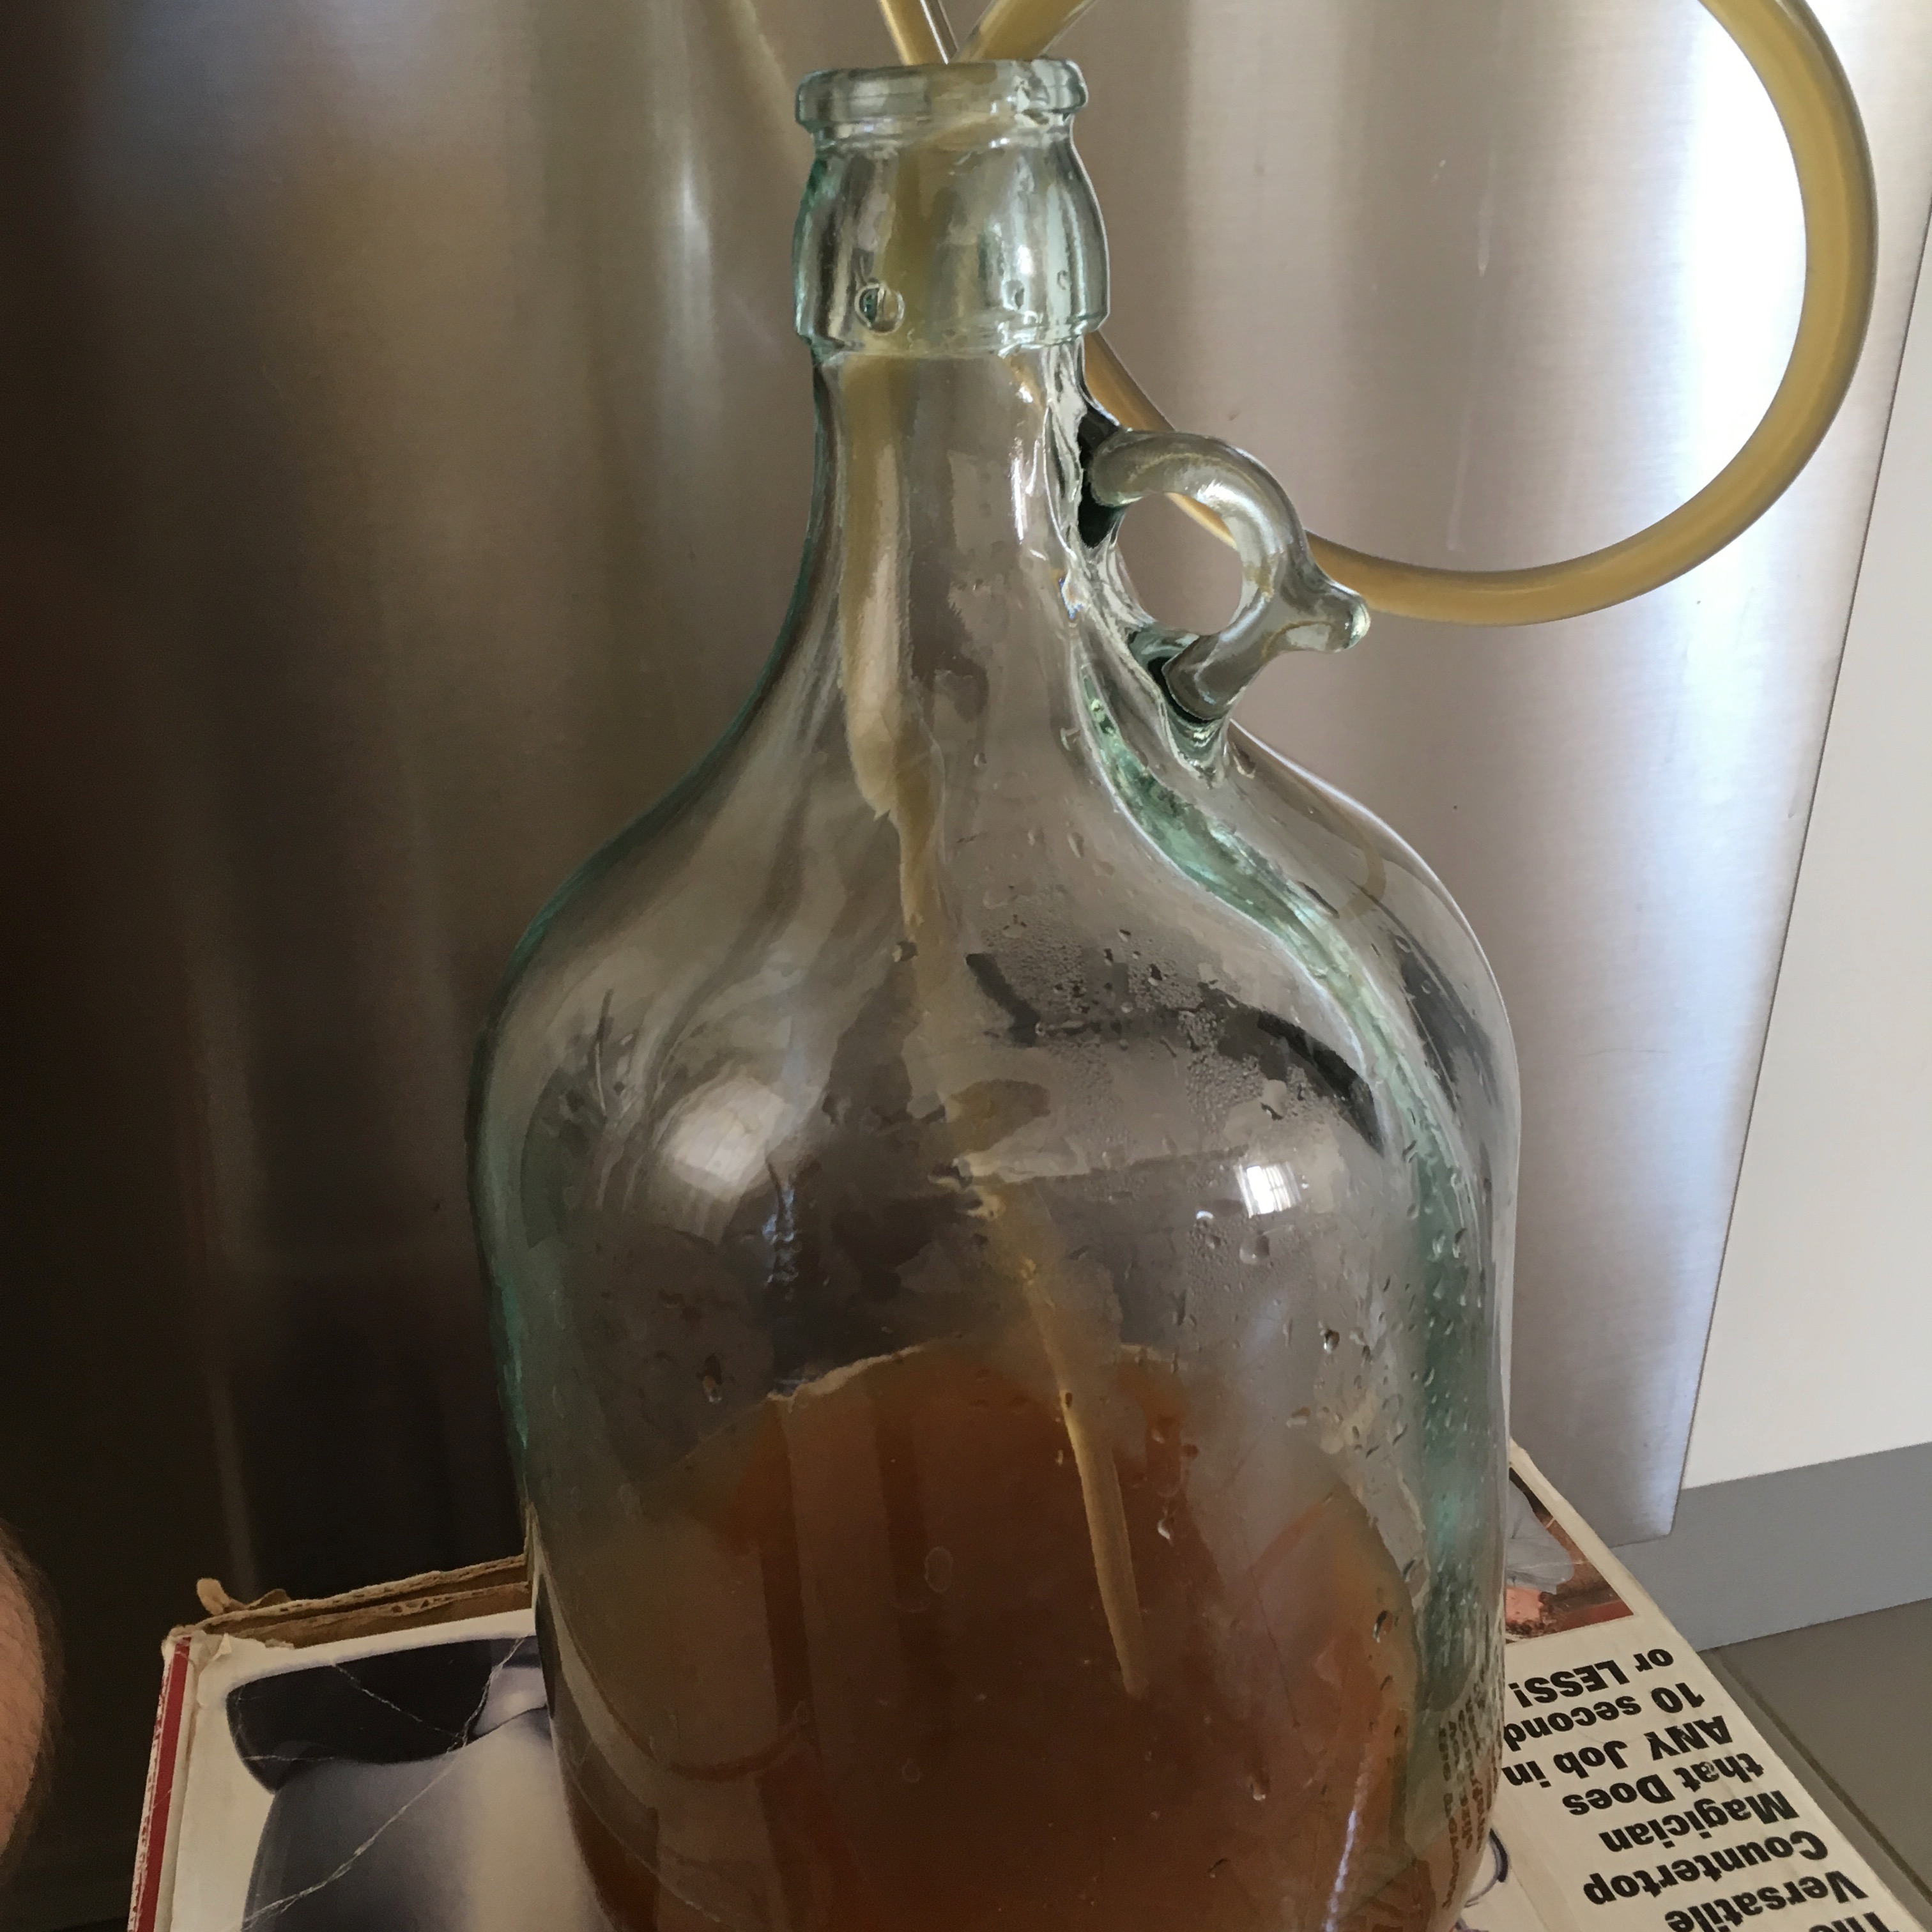 Transfer the wort into the carboy. I try to get less of the gunk in the pot but usually a bit comes through